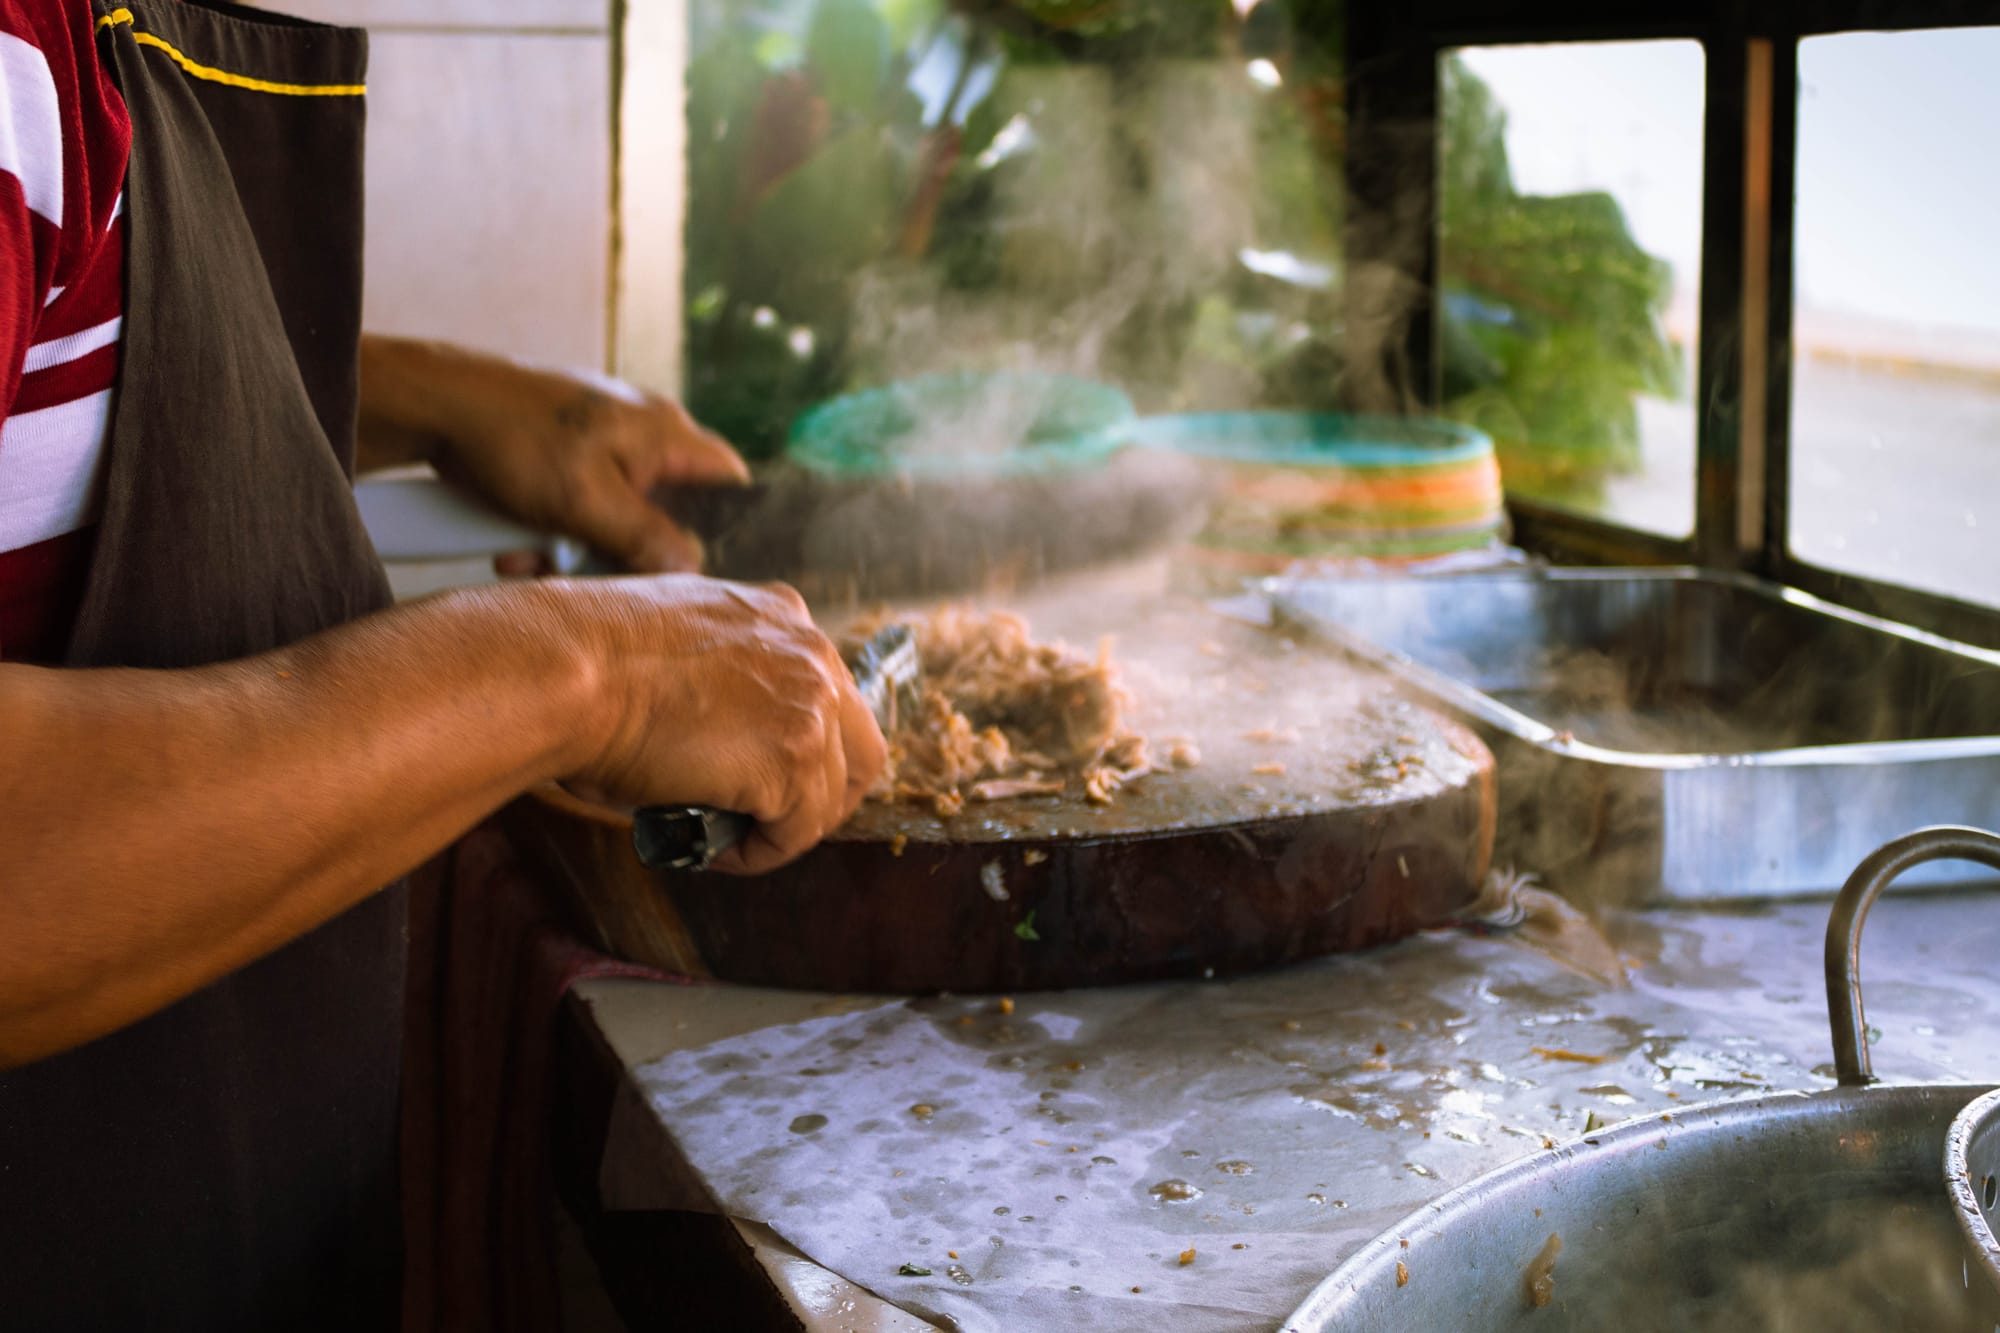 What Is Al Pastor? A Guide to the Popular Mexican Food + Recipes